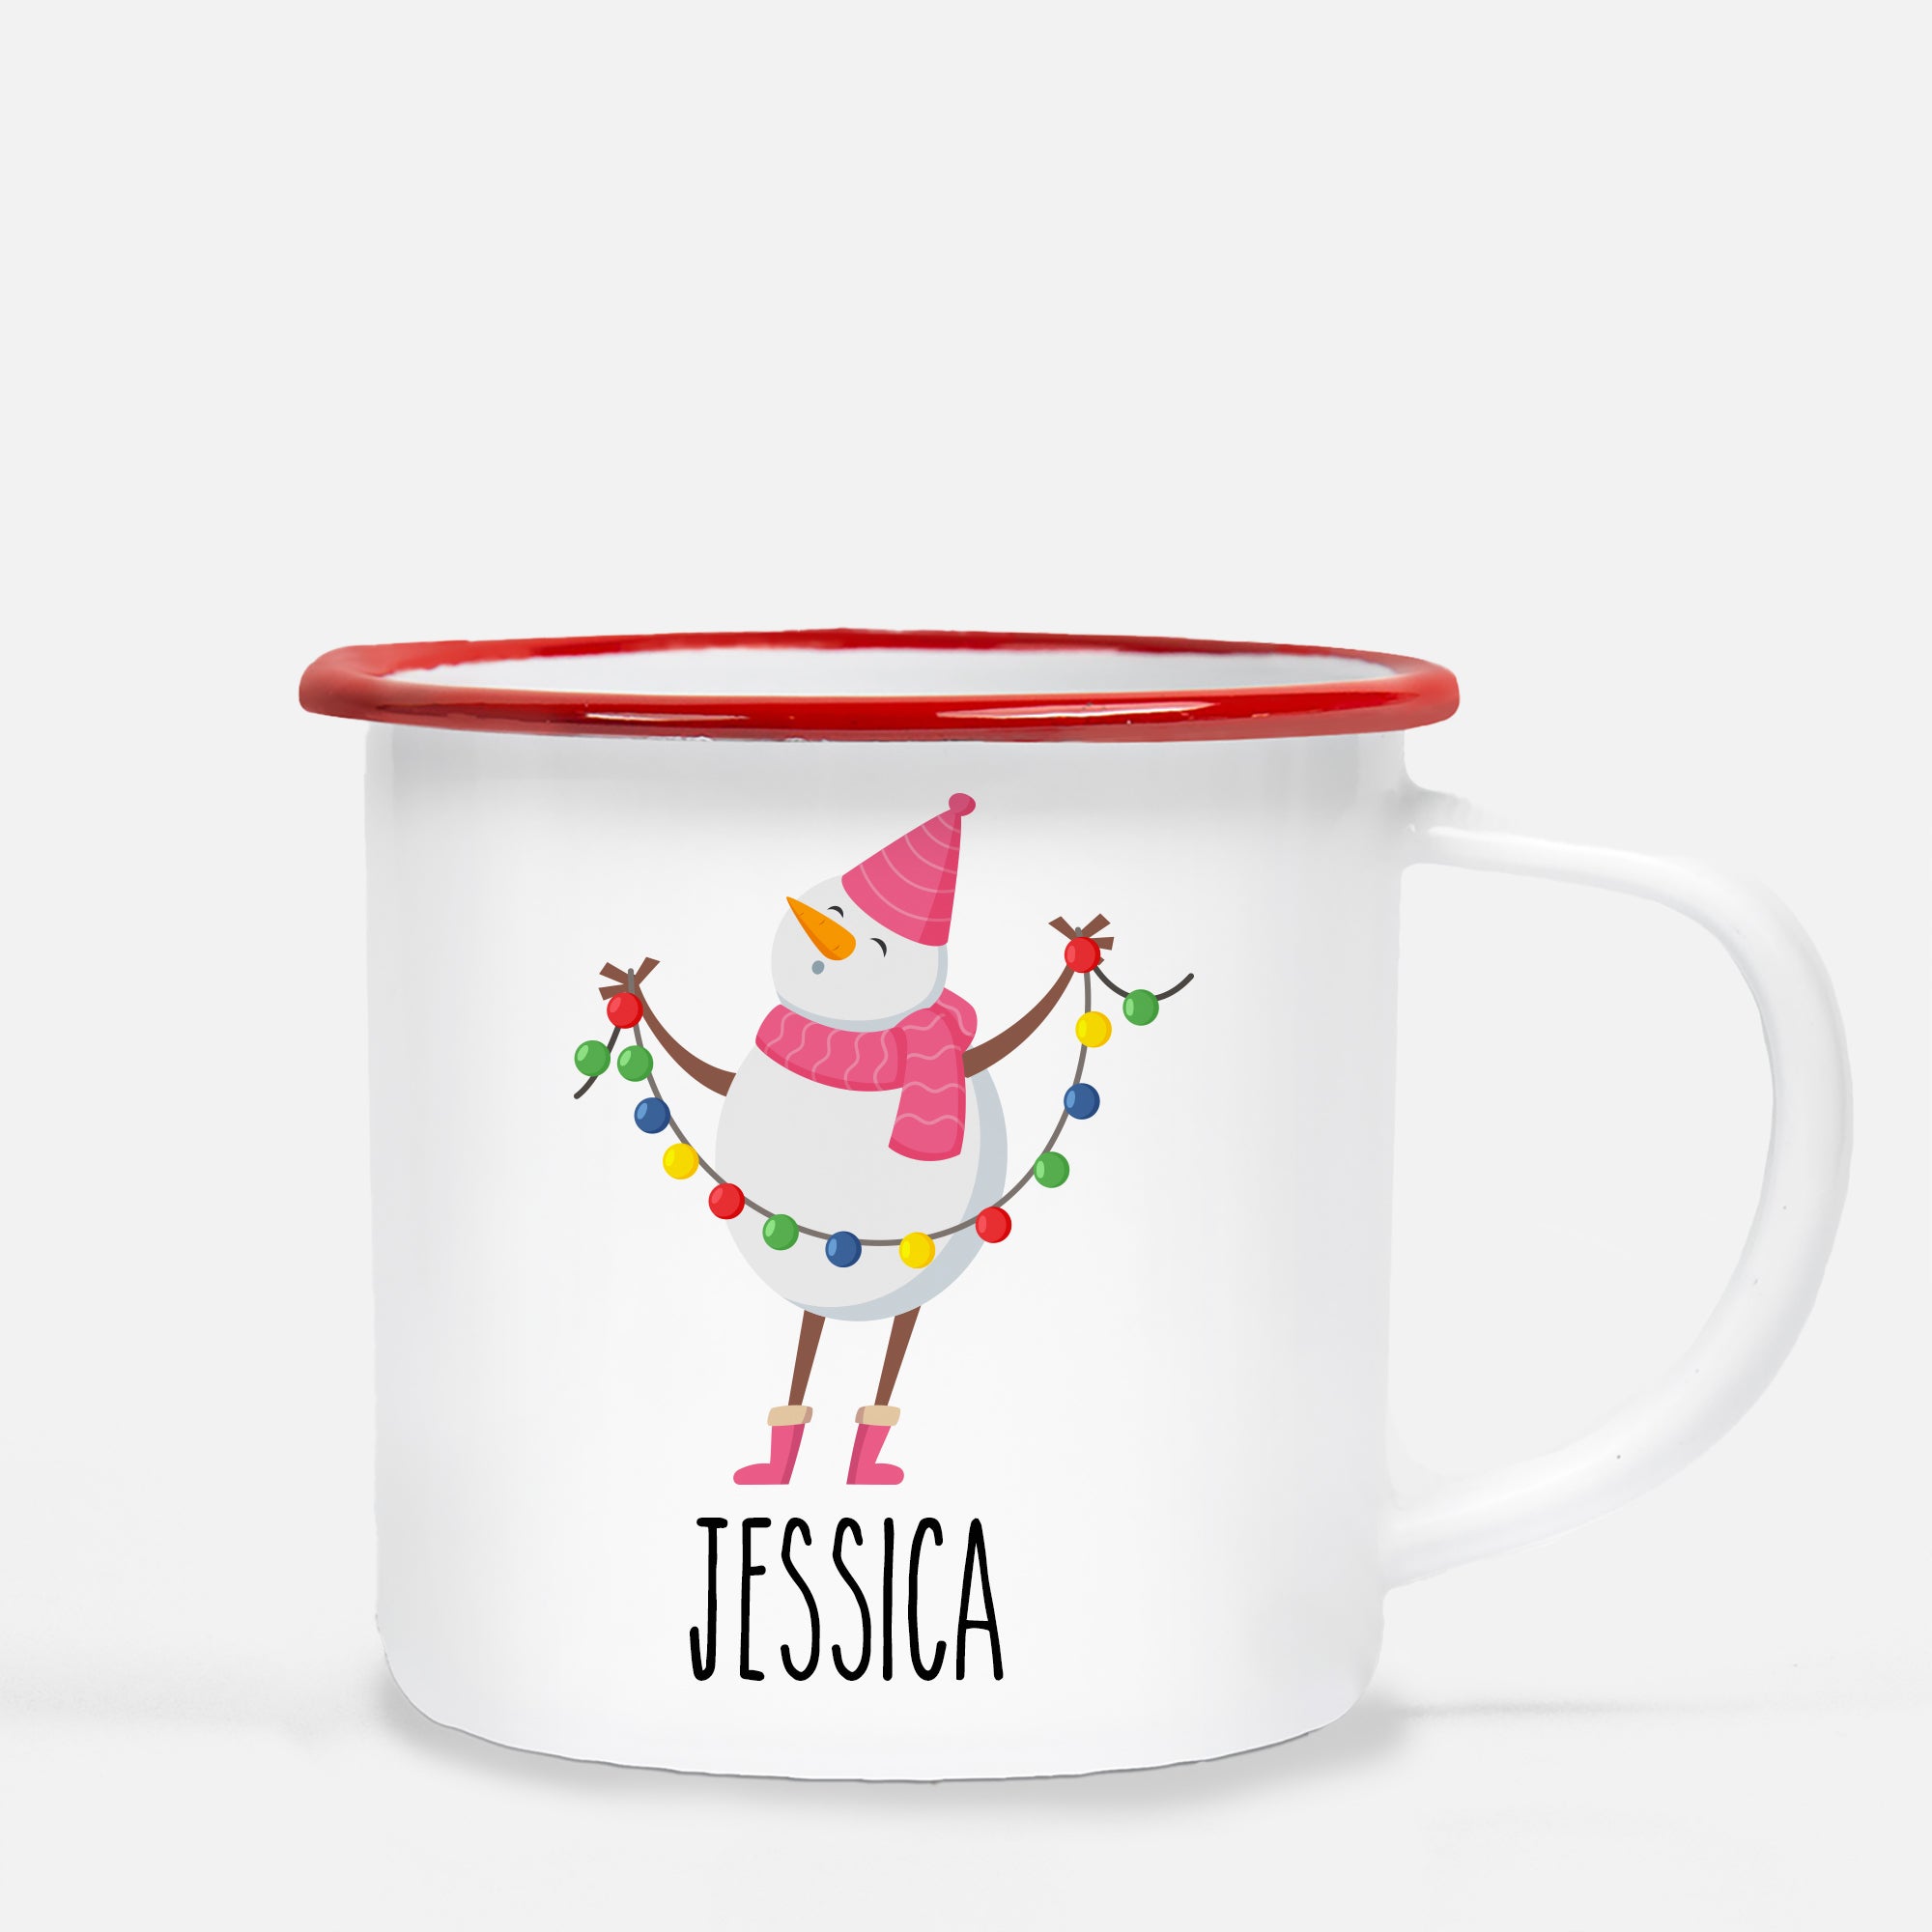 Christmas Camp Mug, Snowman with holiday  lights, Personalized, Red Lip